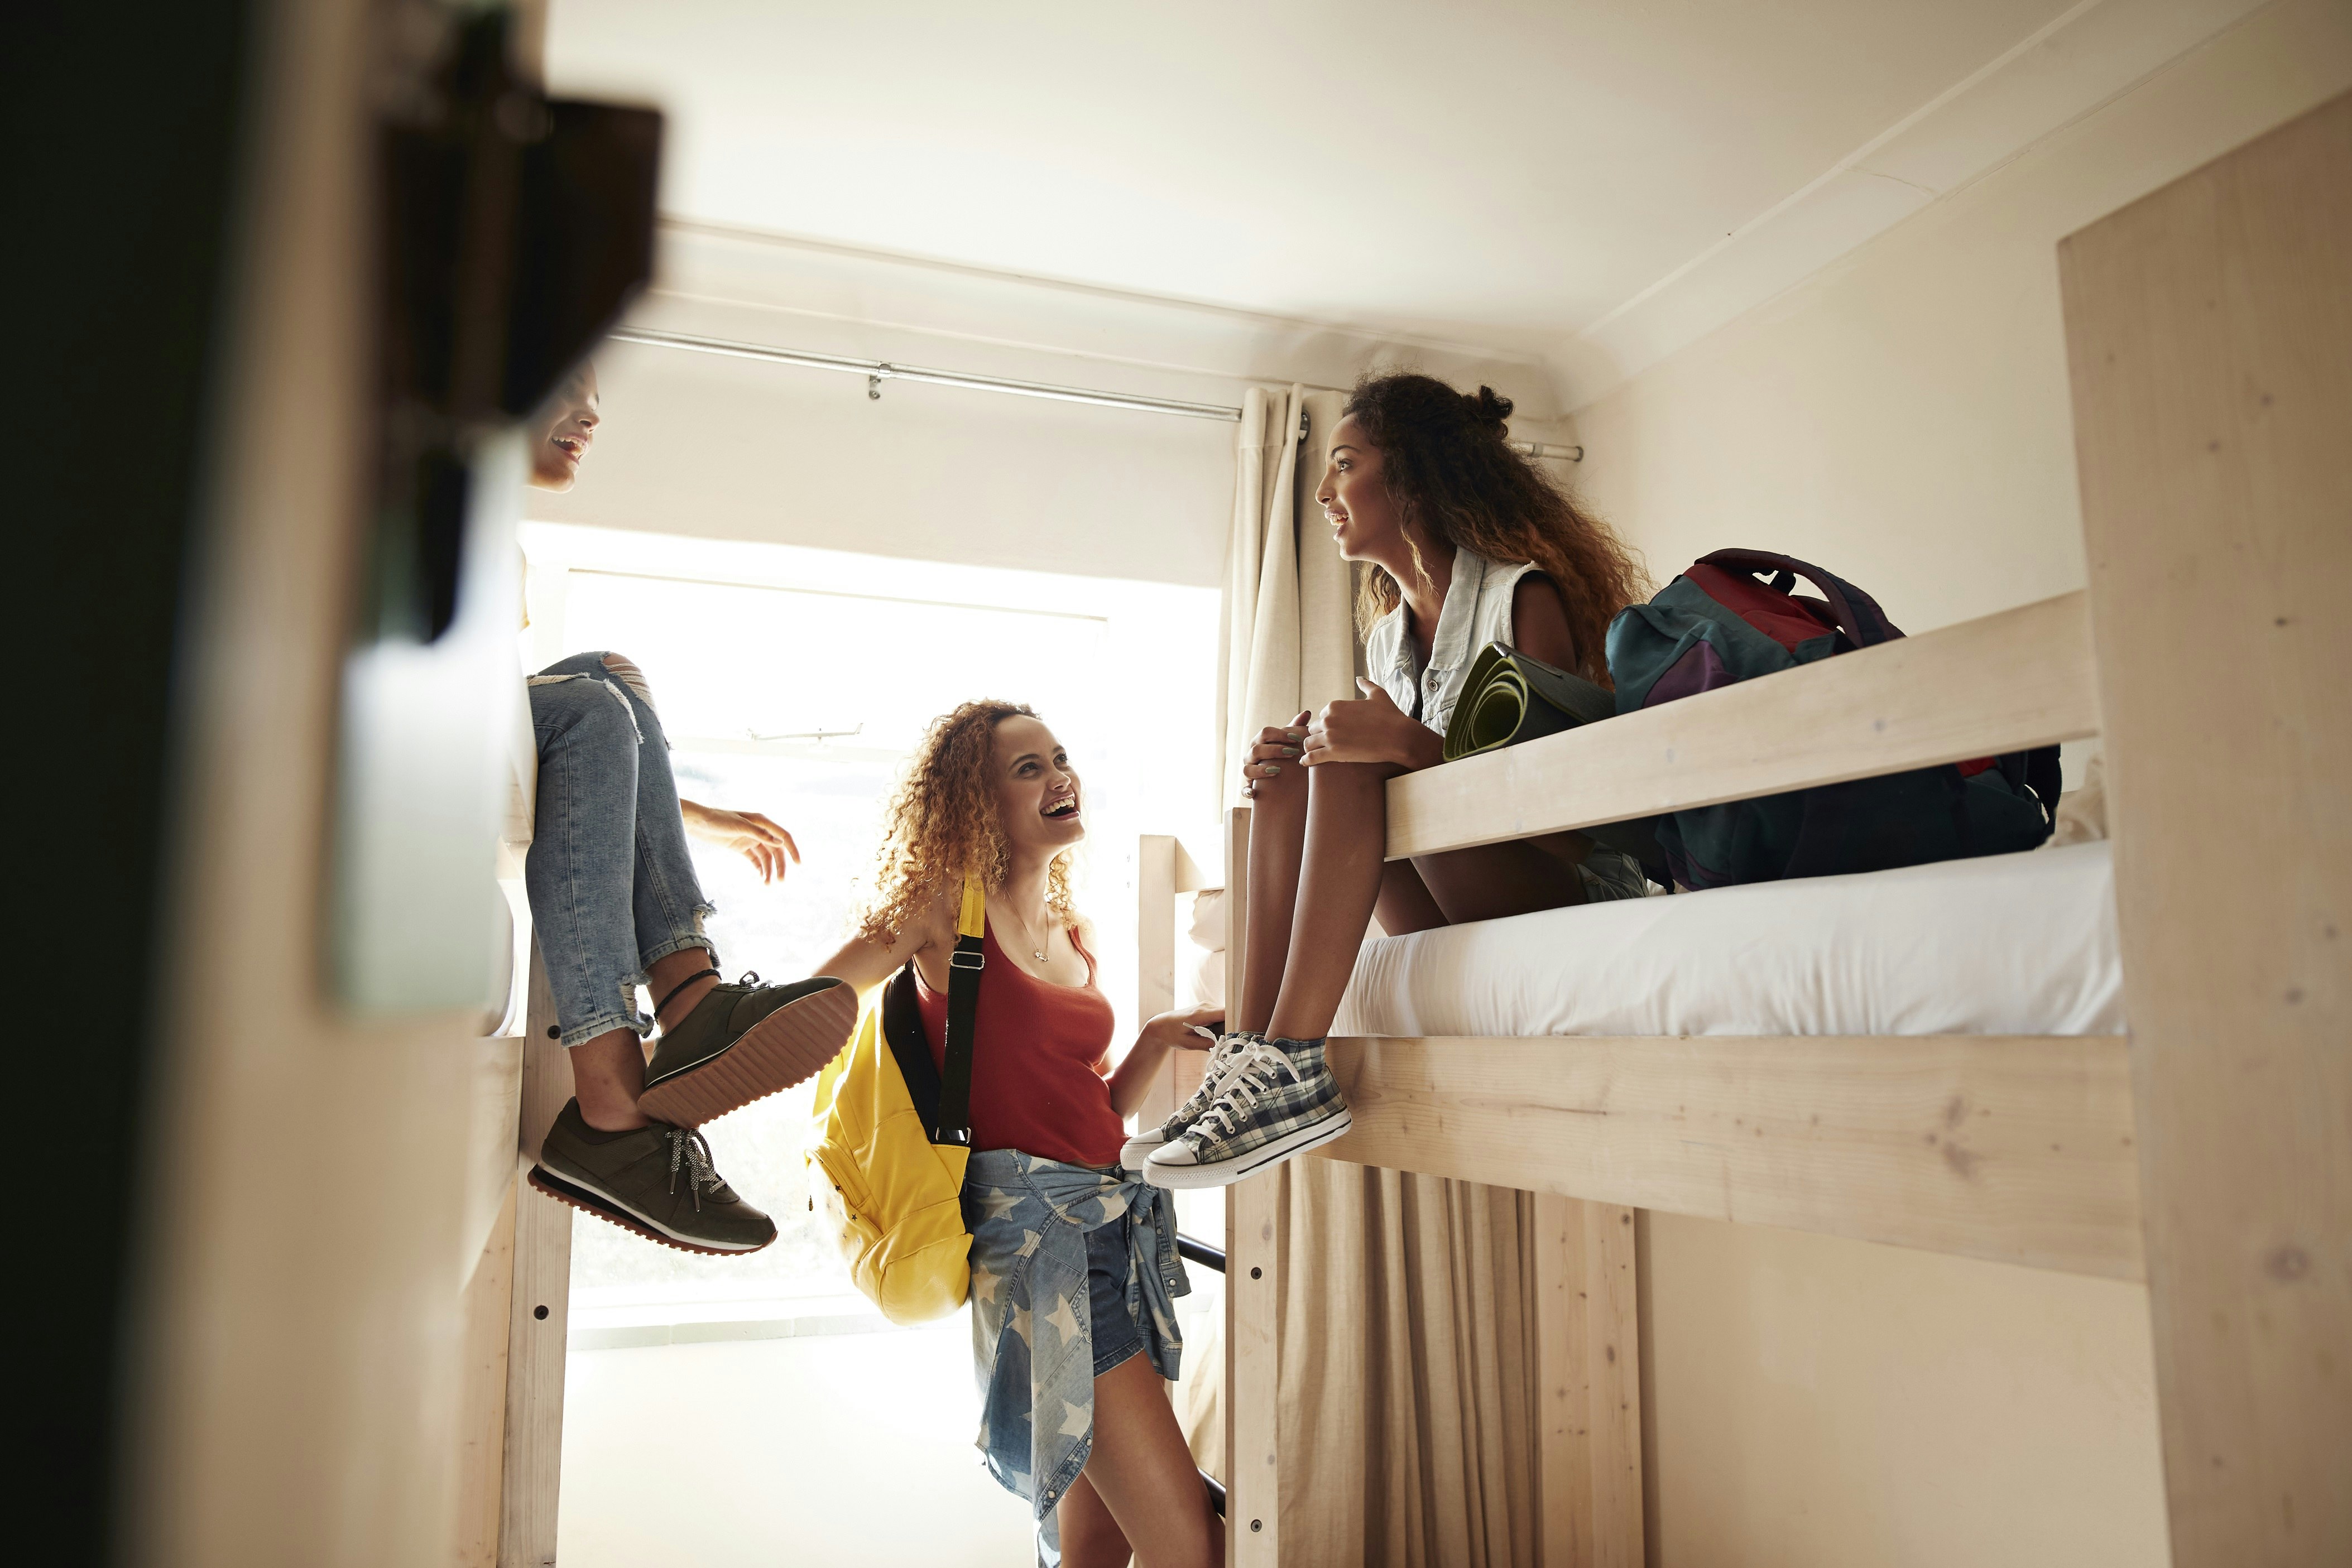 Three young women chat in a hostel dormitory. Two of the girls sit on the top bunk of opposite beds, while the other stands on the floor.